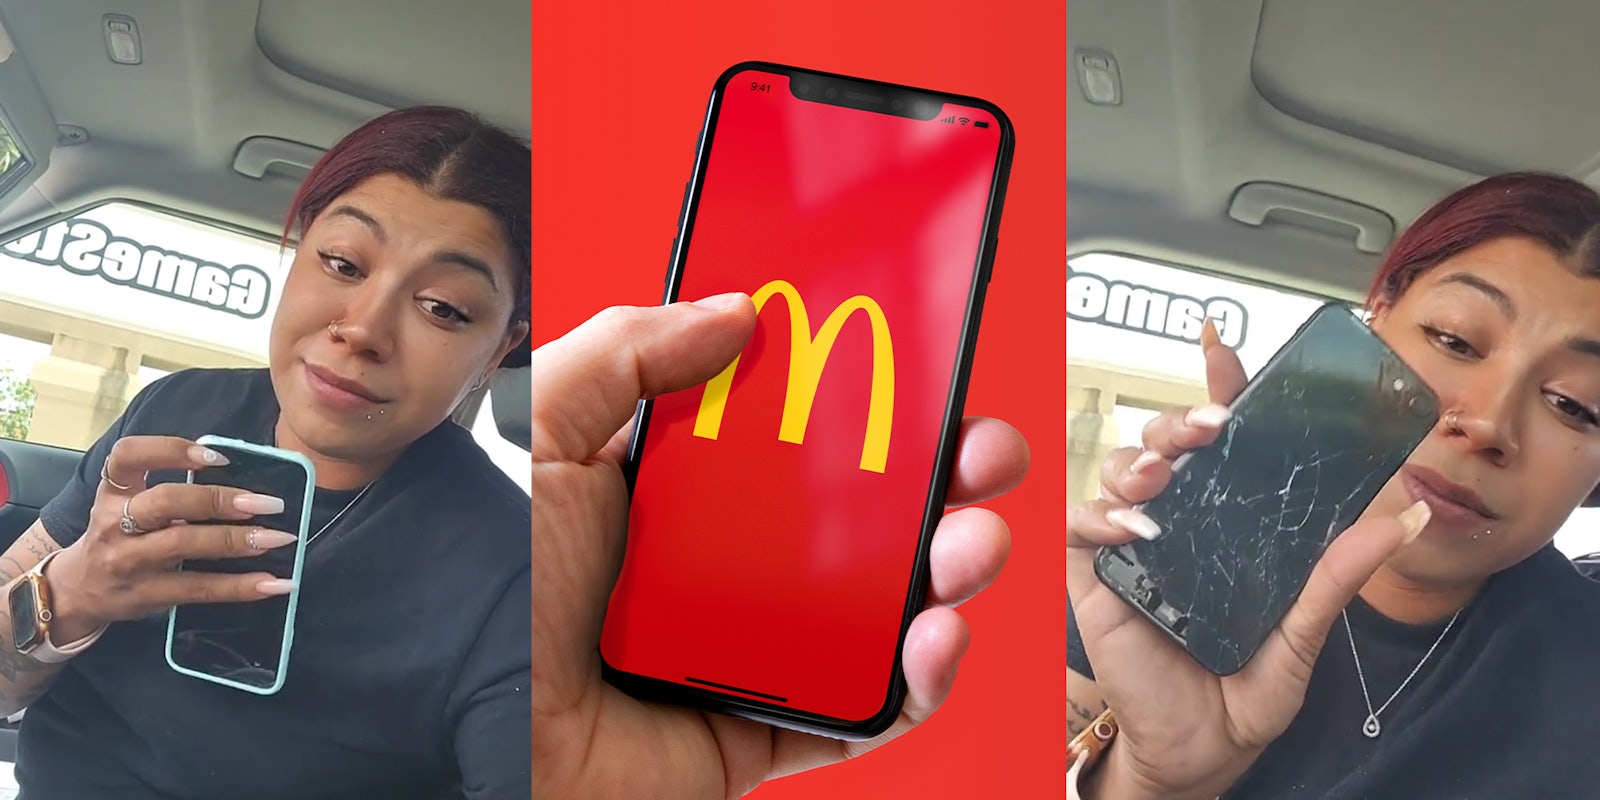 Woman holding cracked iPhone; hand holding iPhone with McDonalds M logo